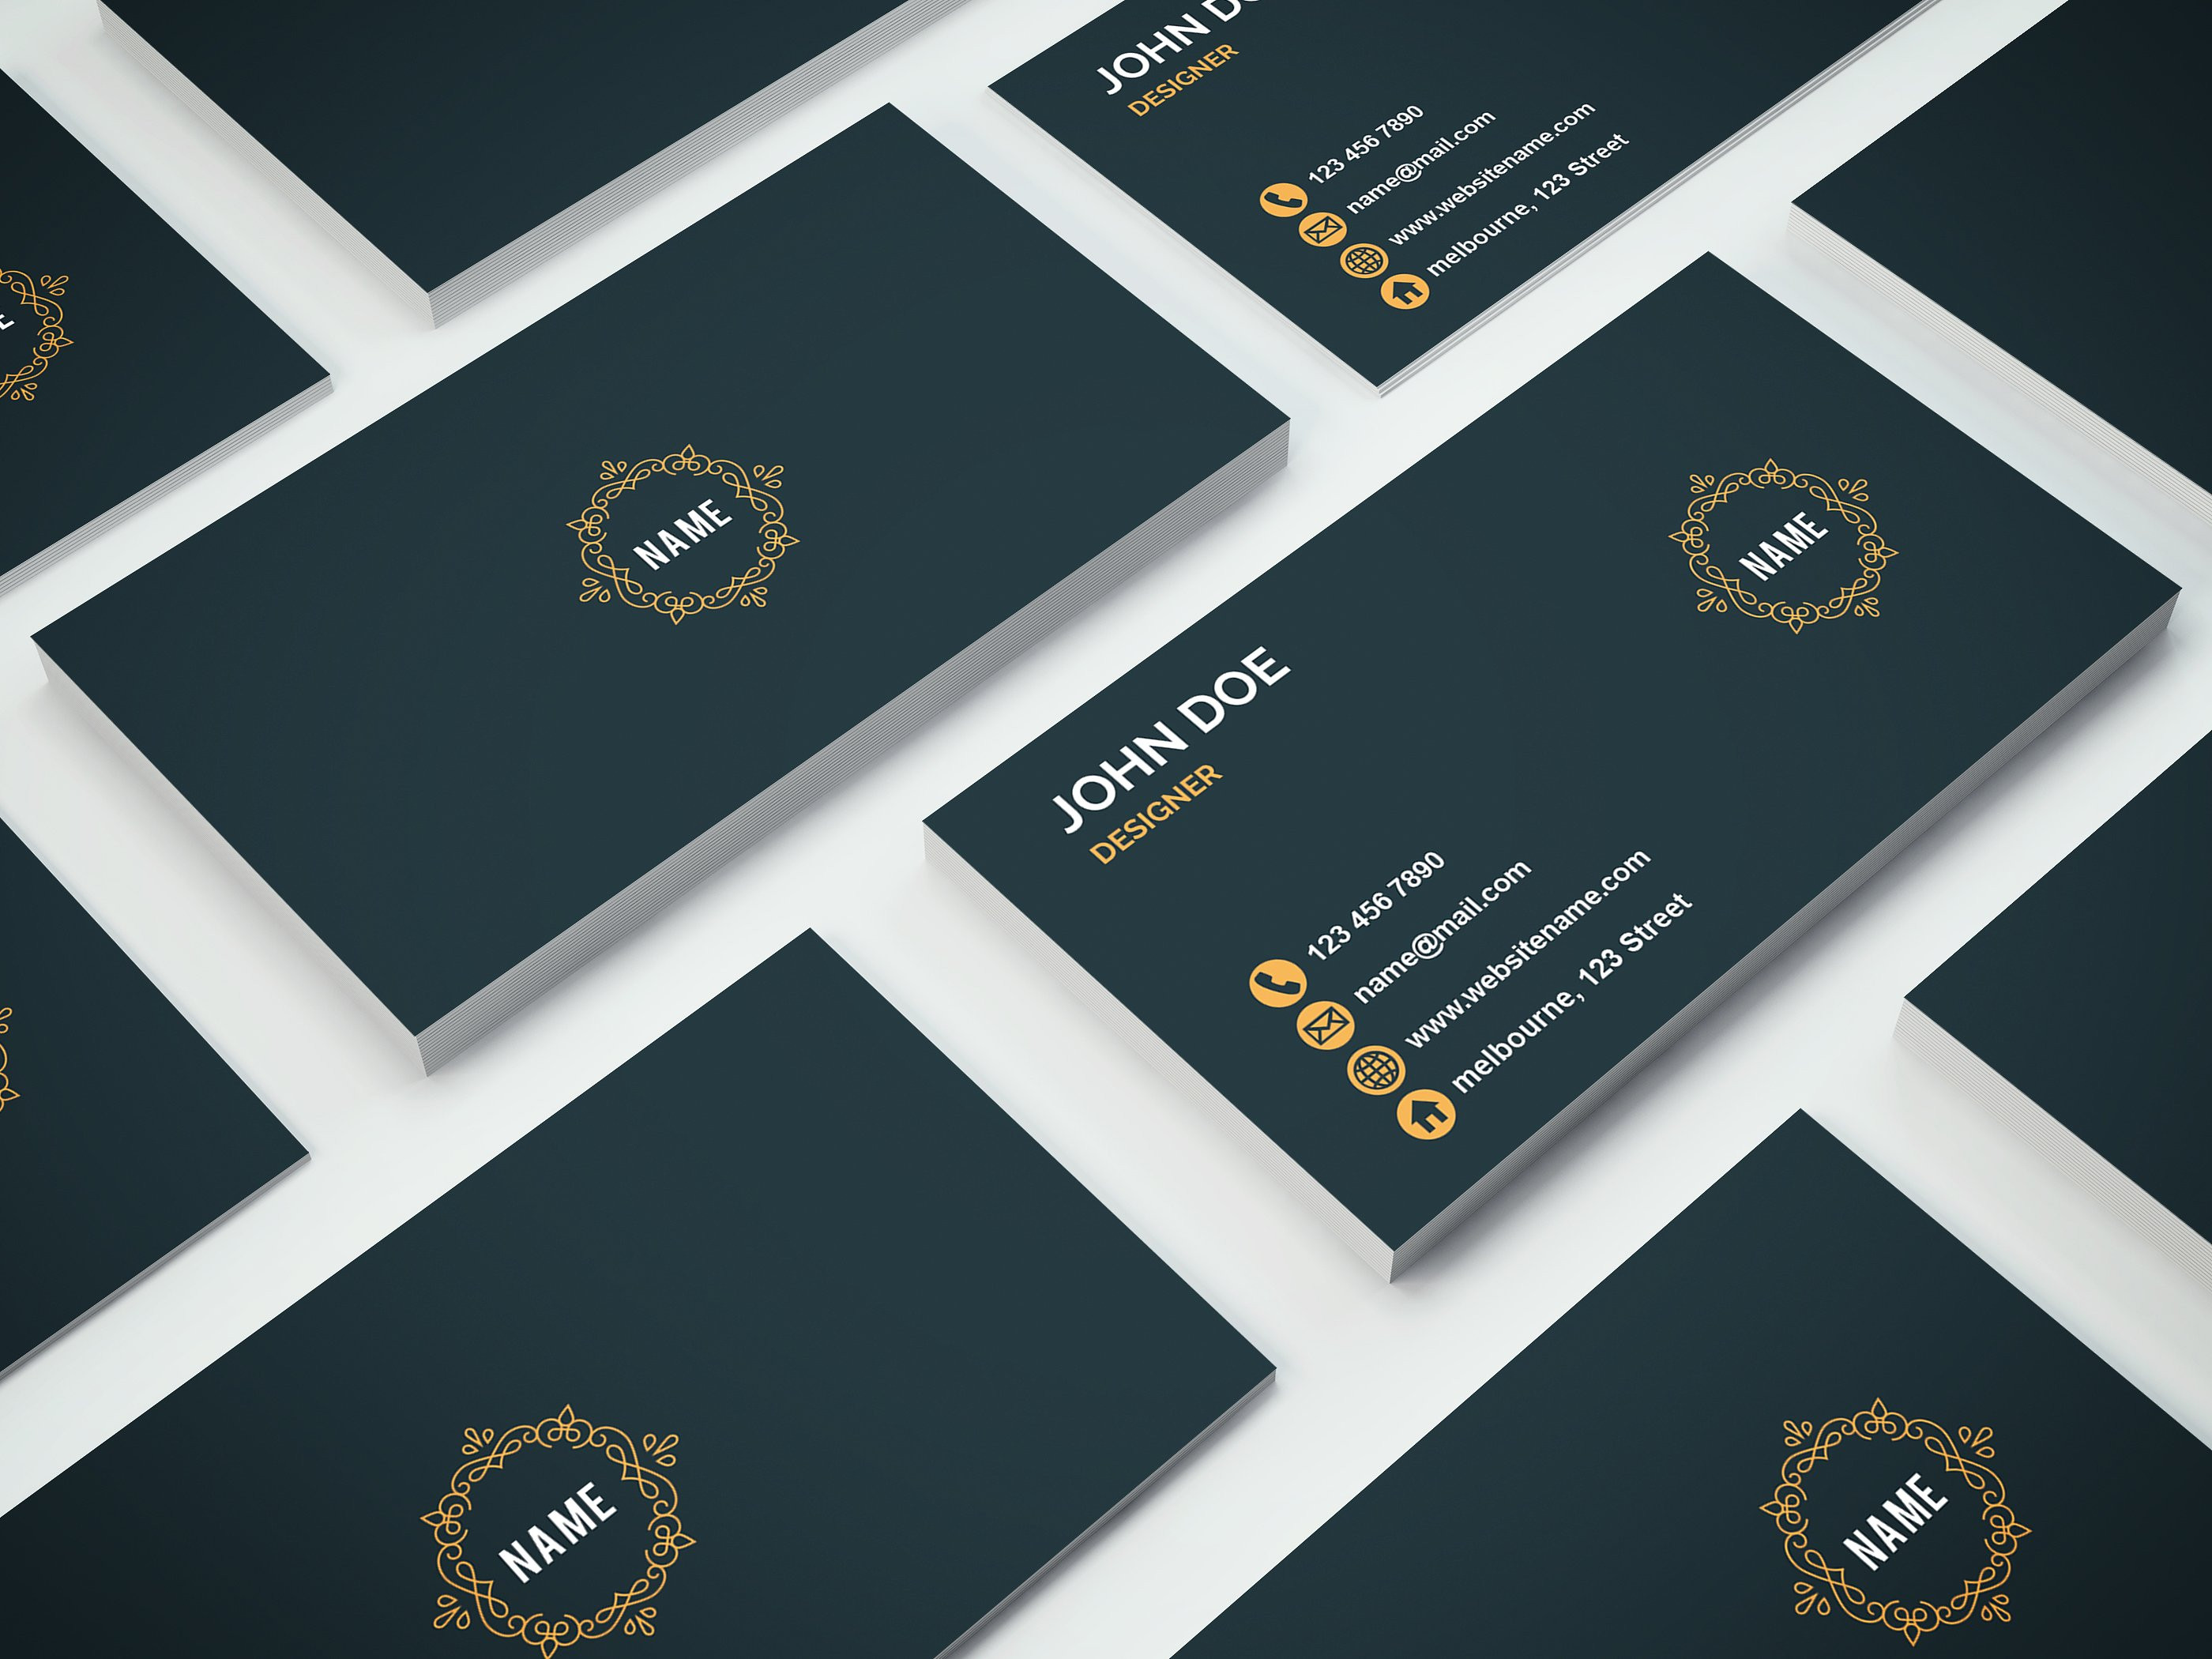 Web Developer Business Card Templates Awesome Design 42 Best Of Web Design Business Cards Templates